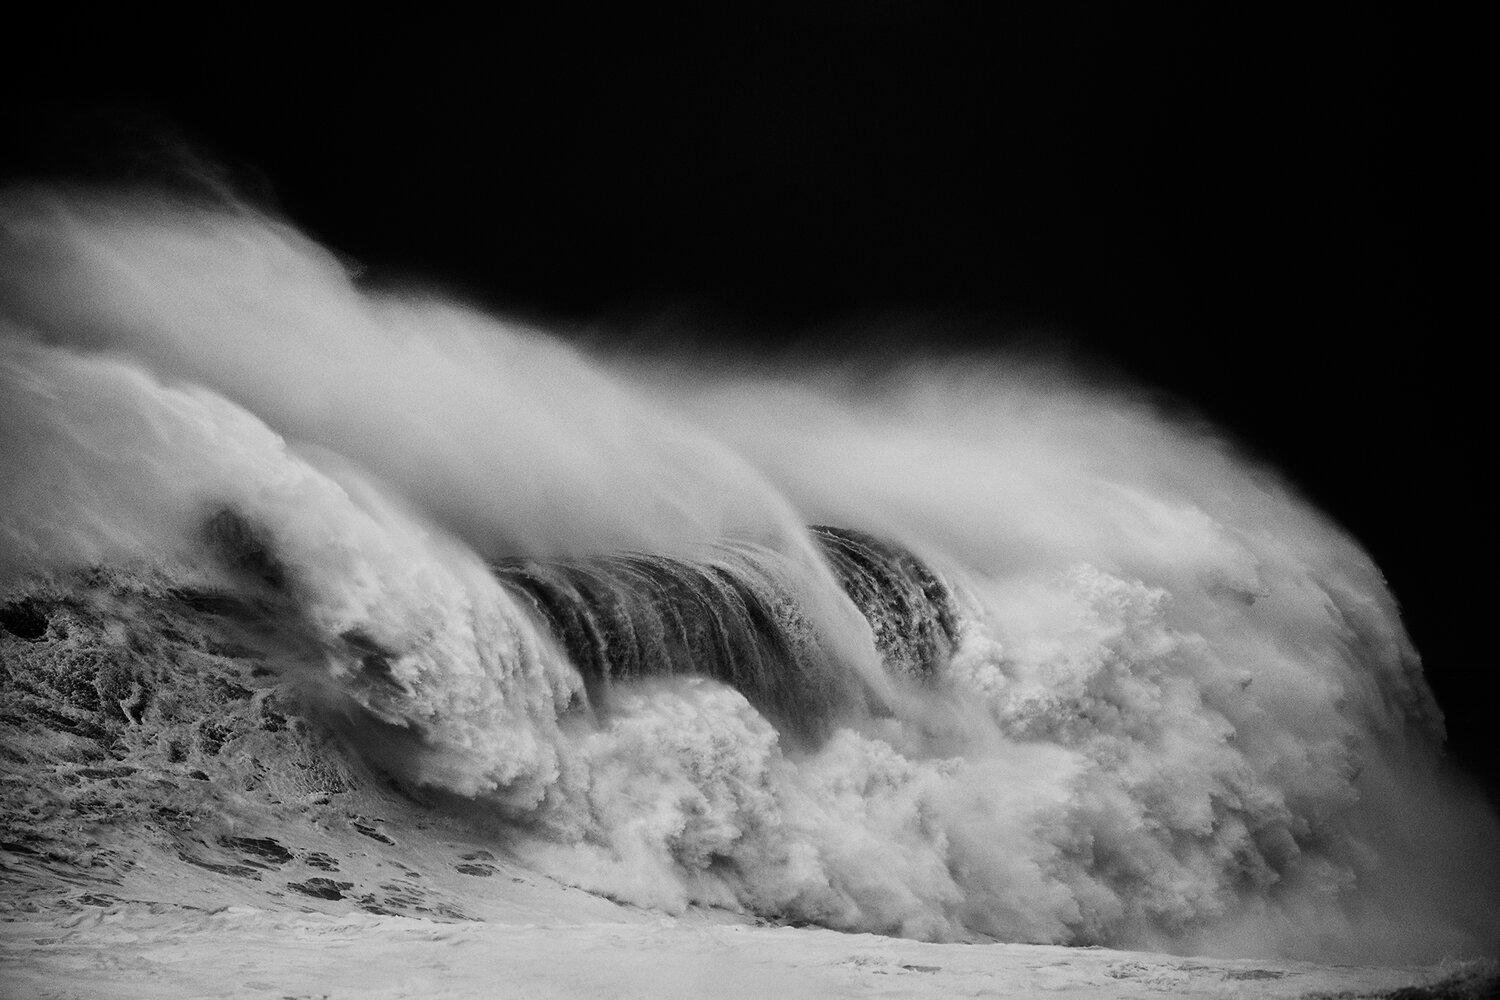 Alessandro Puccinelli Abstract Photograph - Nazare, Portugal, Waves, Seascape Photography (LARGE FORMAT) - unframed